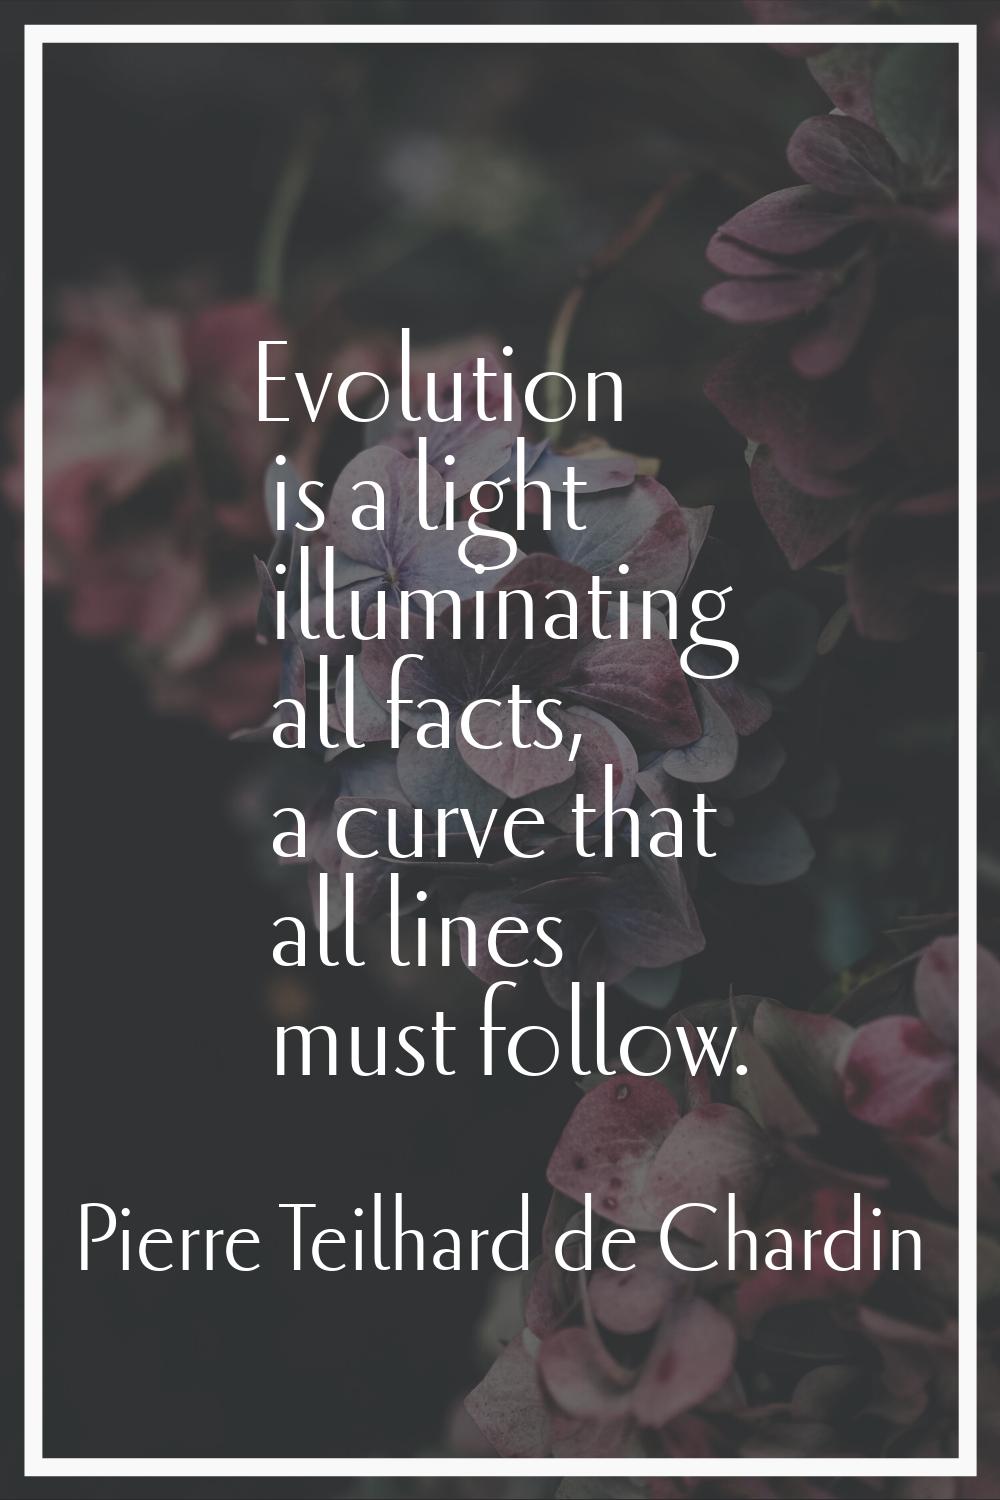 Evolution is a light illuminating all facts, a curve that all lines must follow.